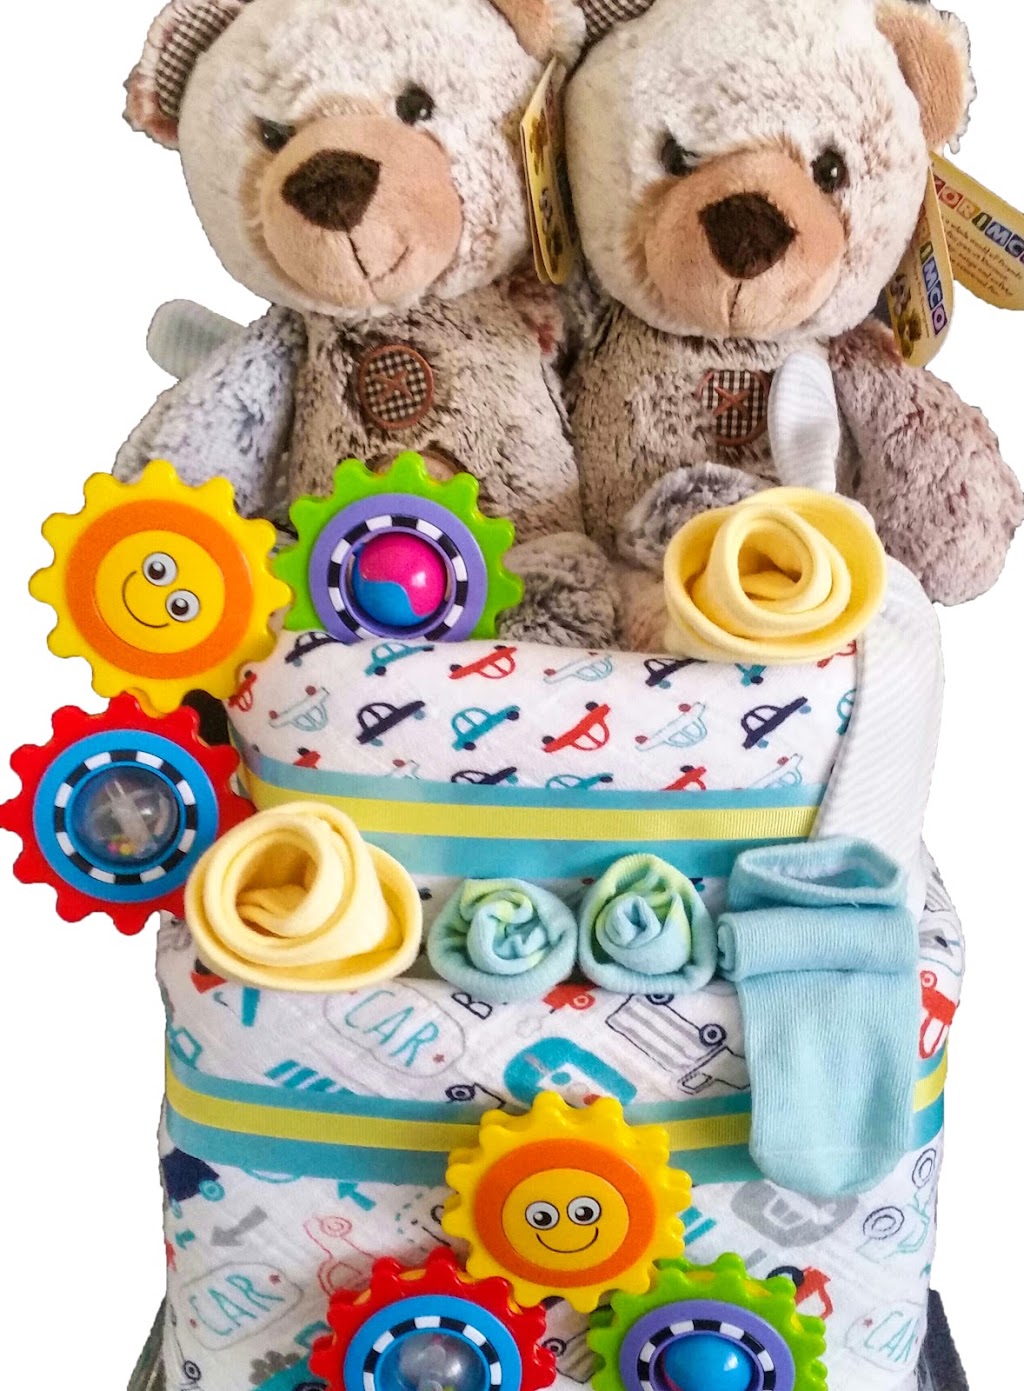 Snugglybubs Nappy Cakes and Baby Gifts | clothing store | 4 Aurora Grove, Ocean Reef WA 6027, Australia | 0439947715 OR +61 439 947 715